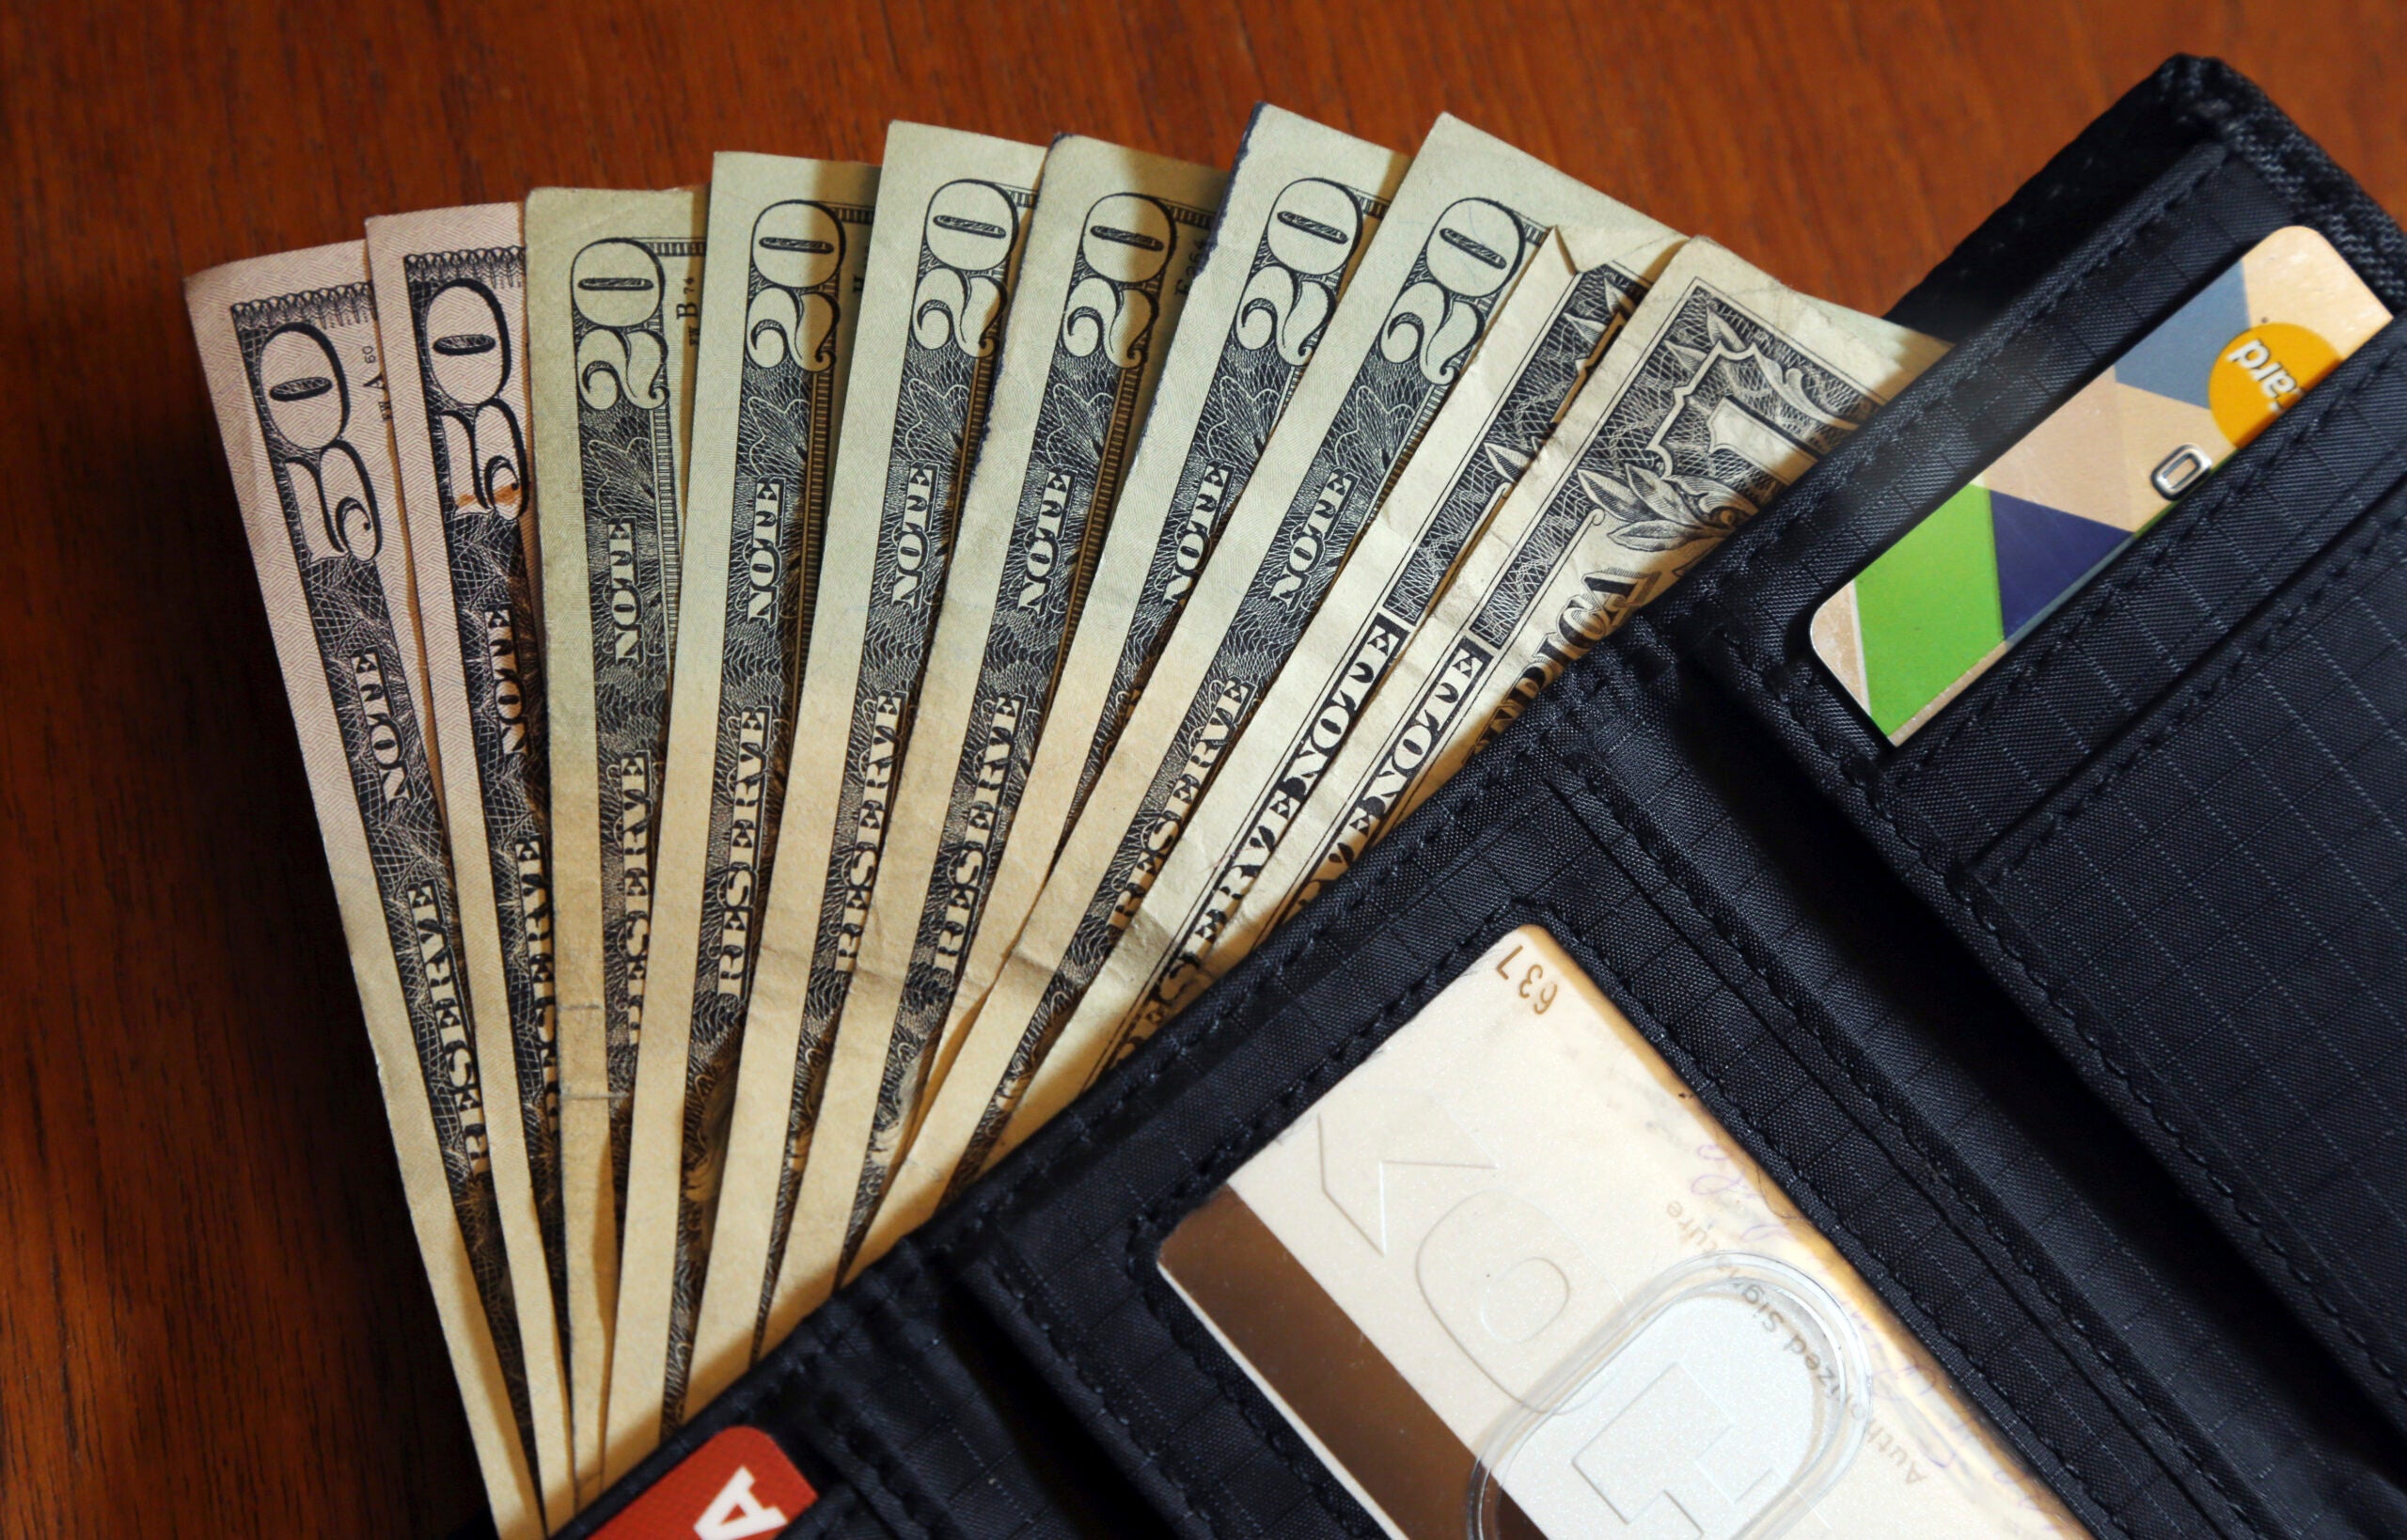 $50, $20, and $1 bills are fanned out from an open black wallet.